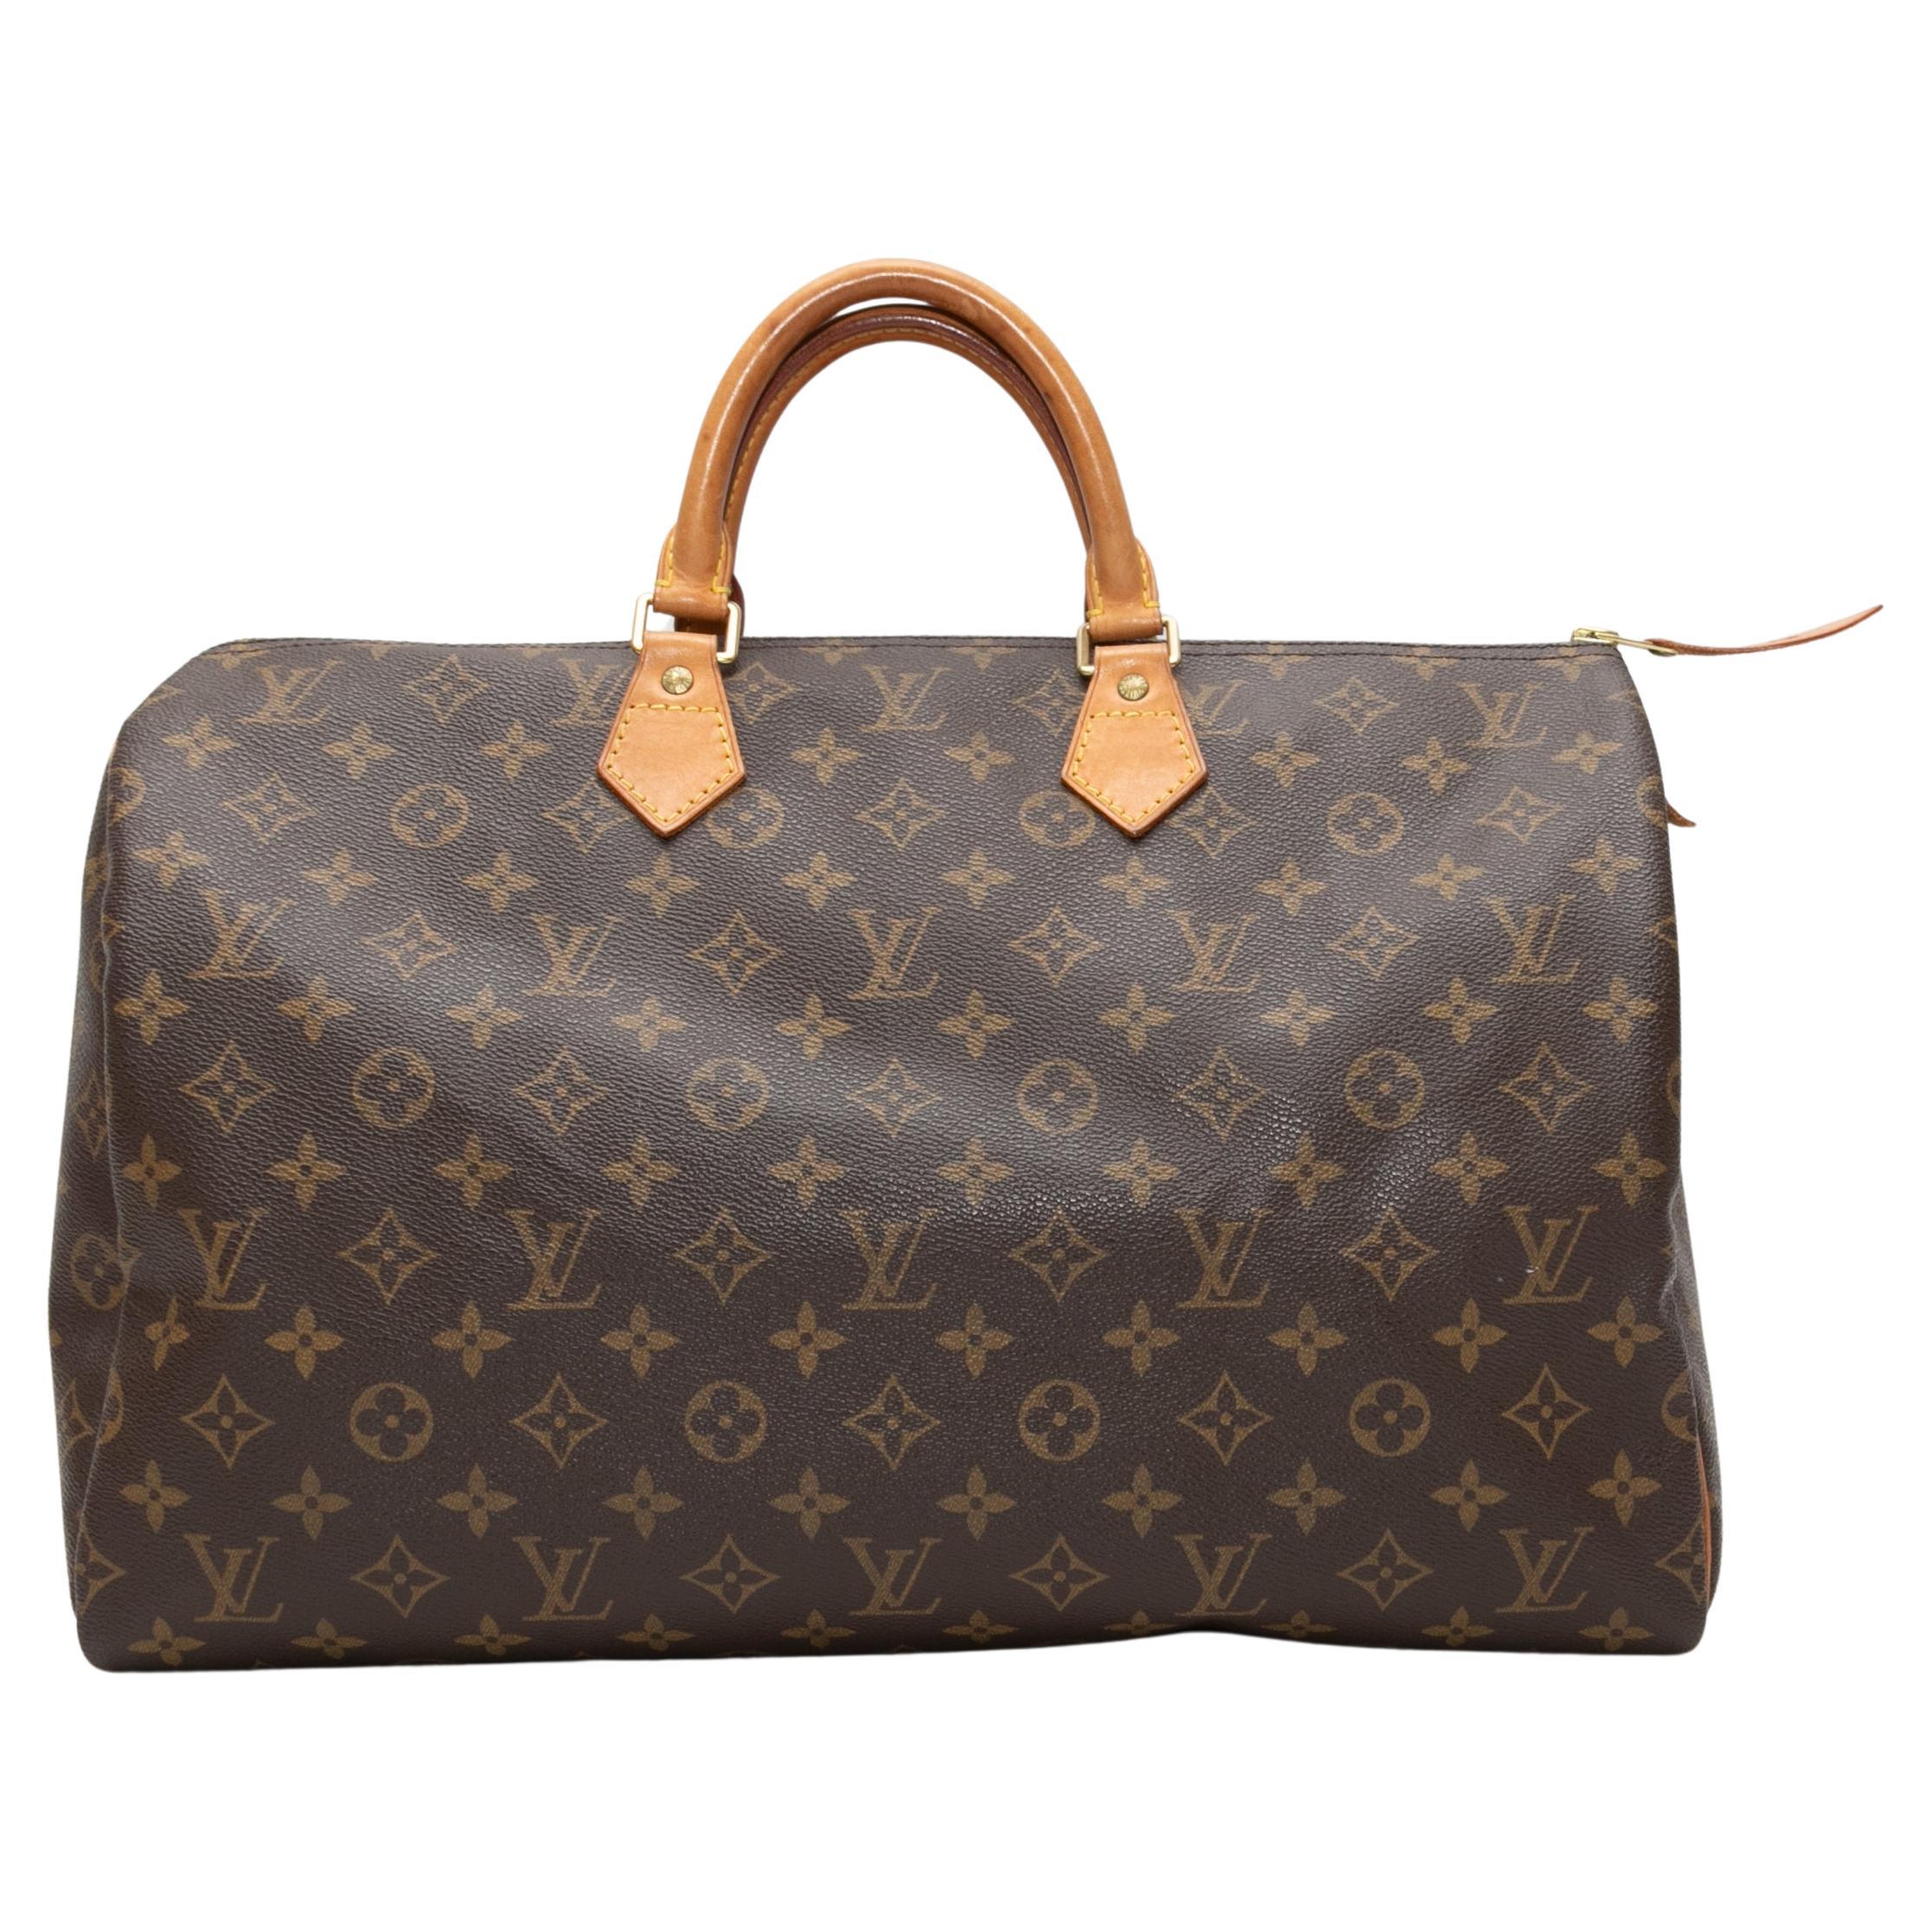 Where can I find the date code on a Louis Vuitton Speedy?